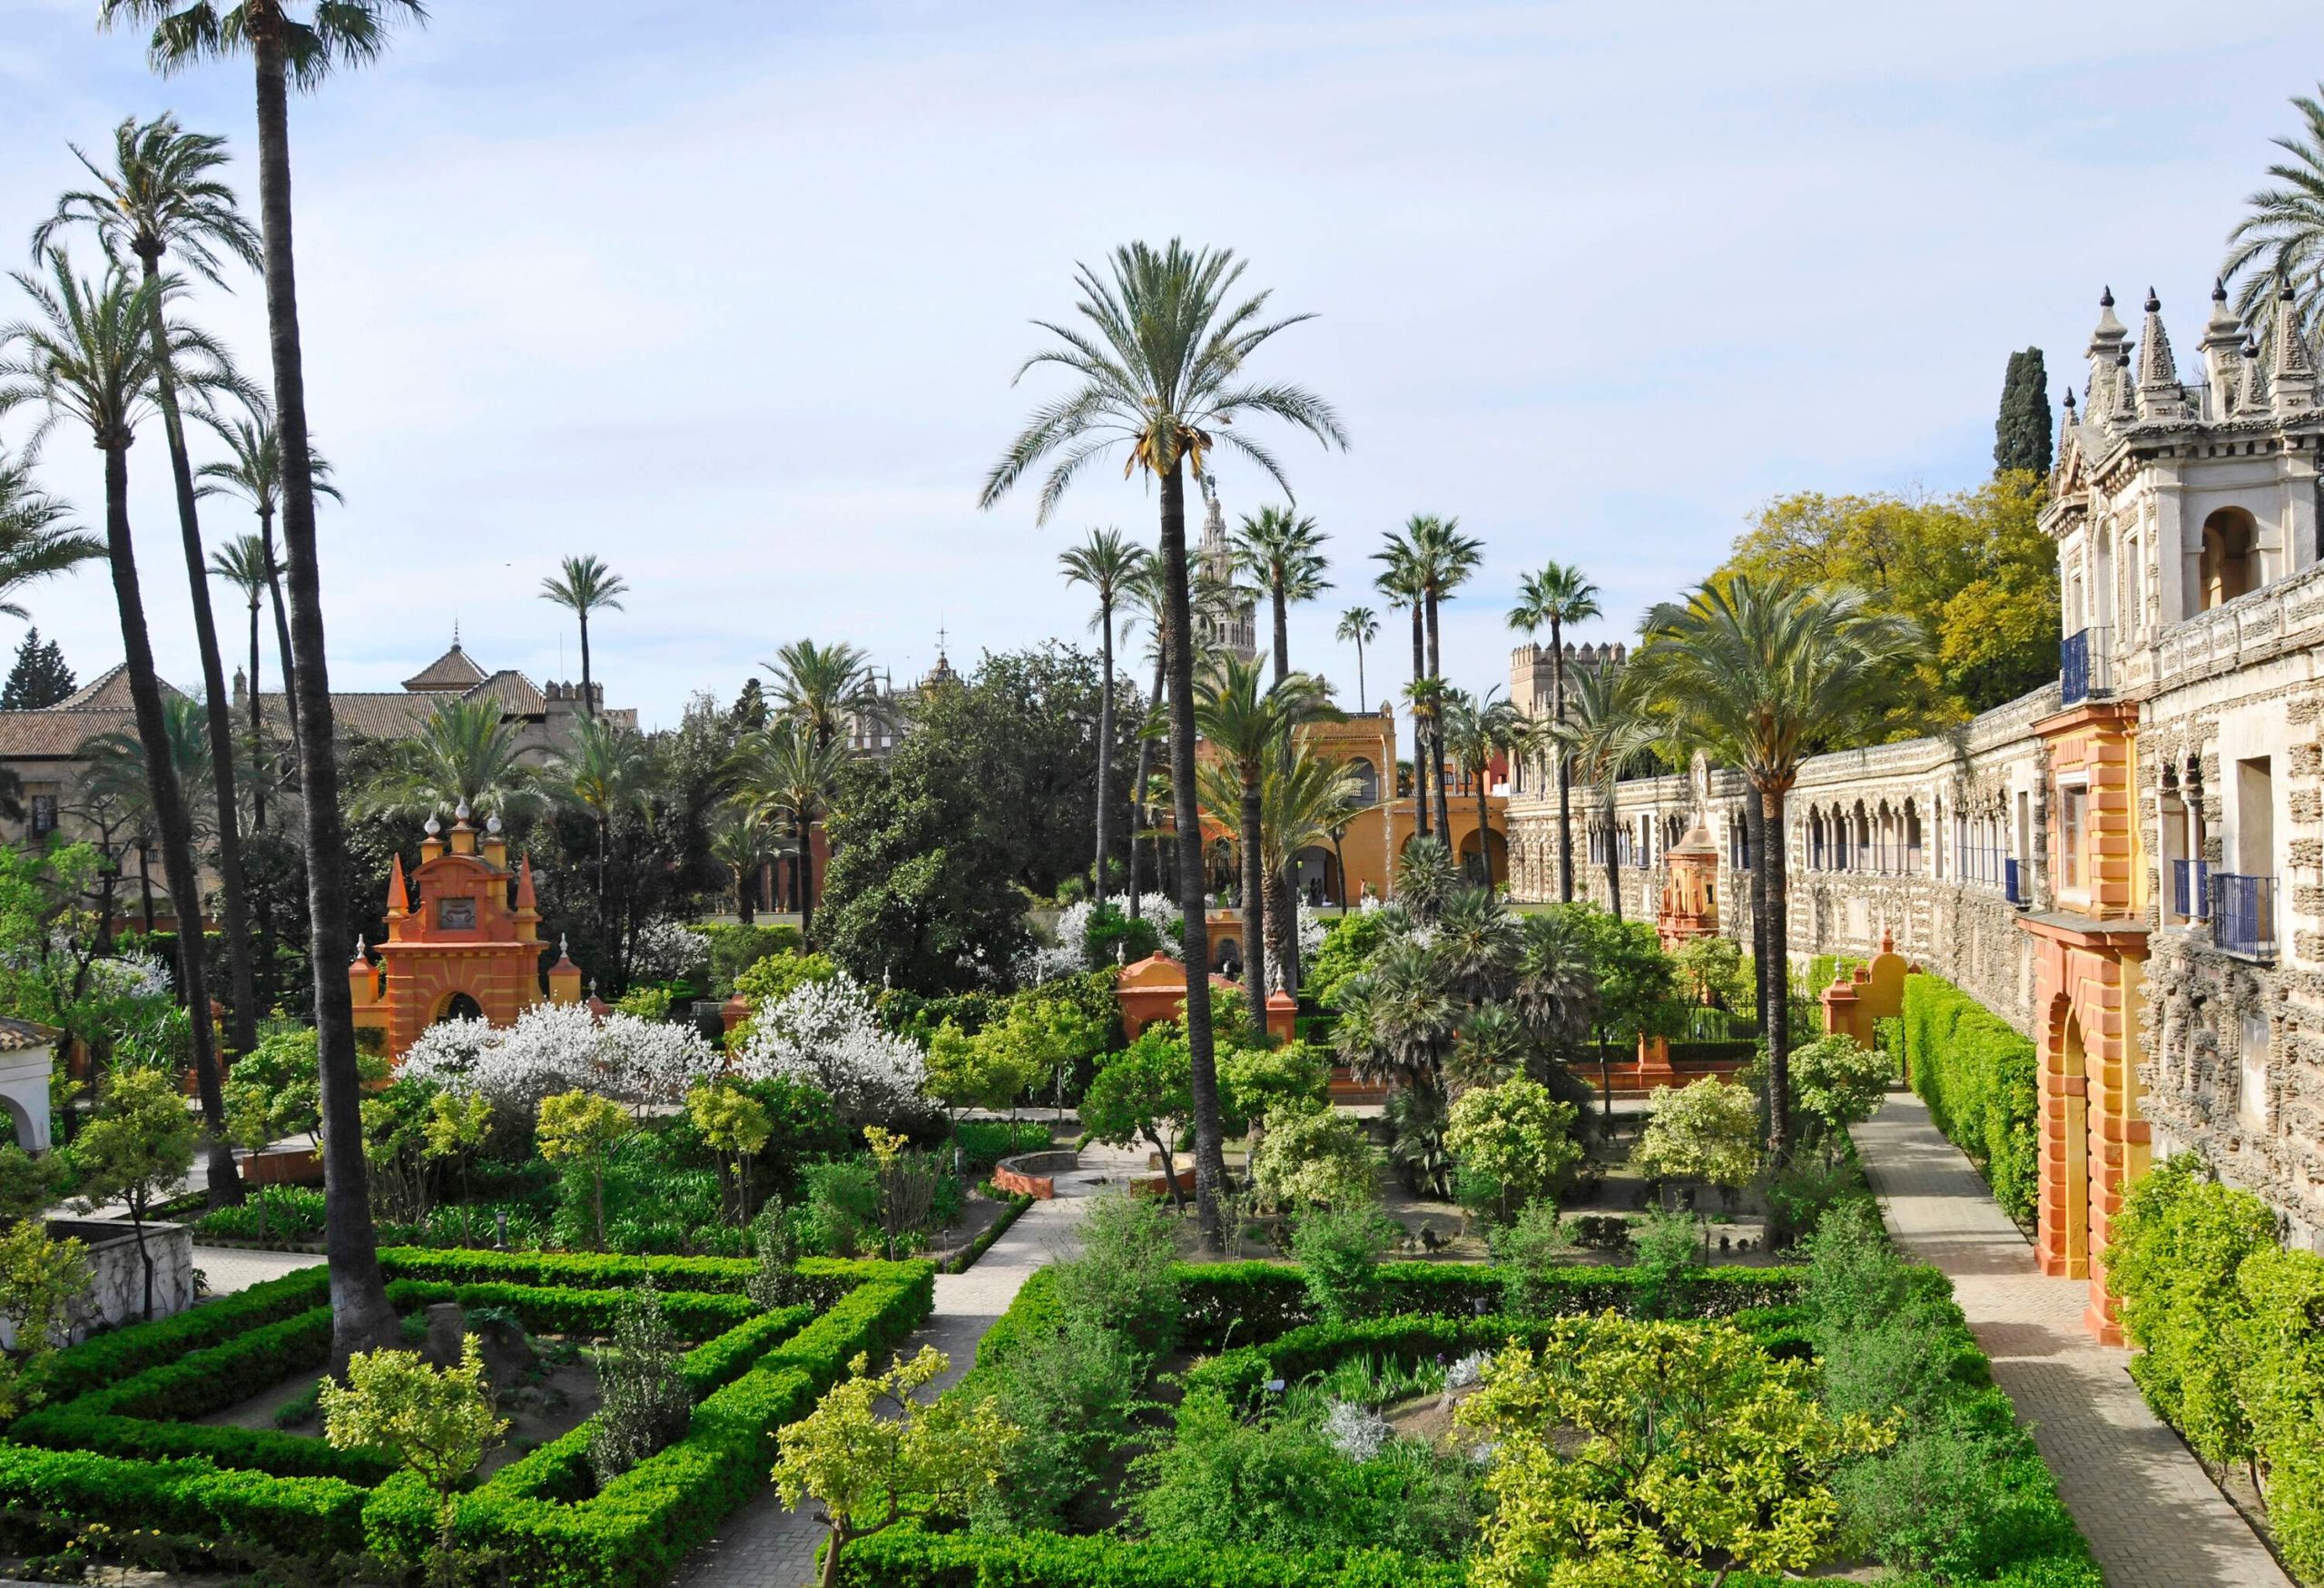 A green space with palm trees and square-shaped gardens.